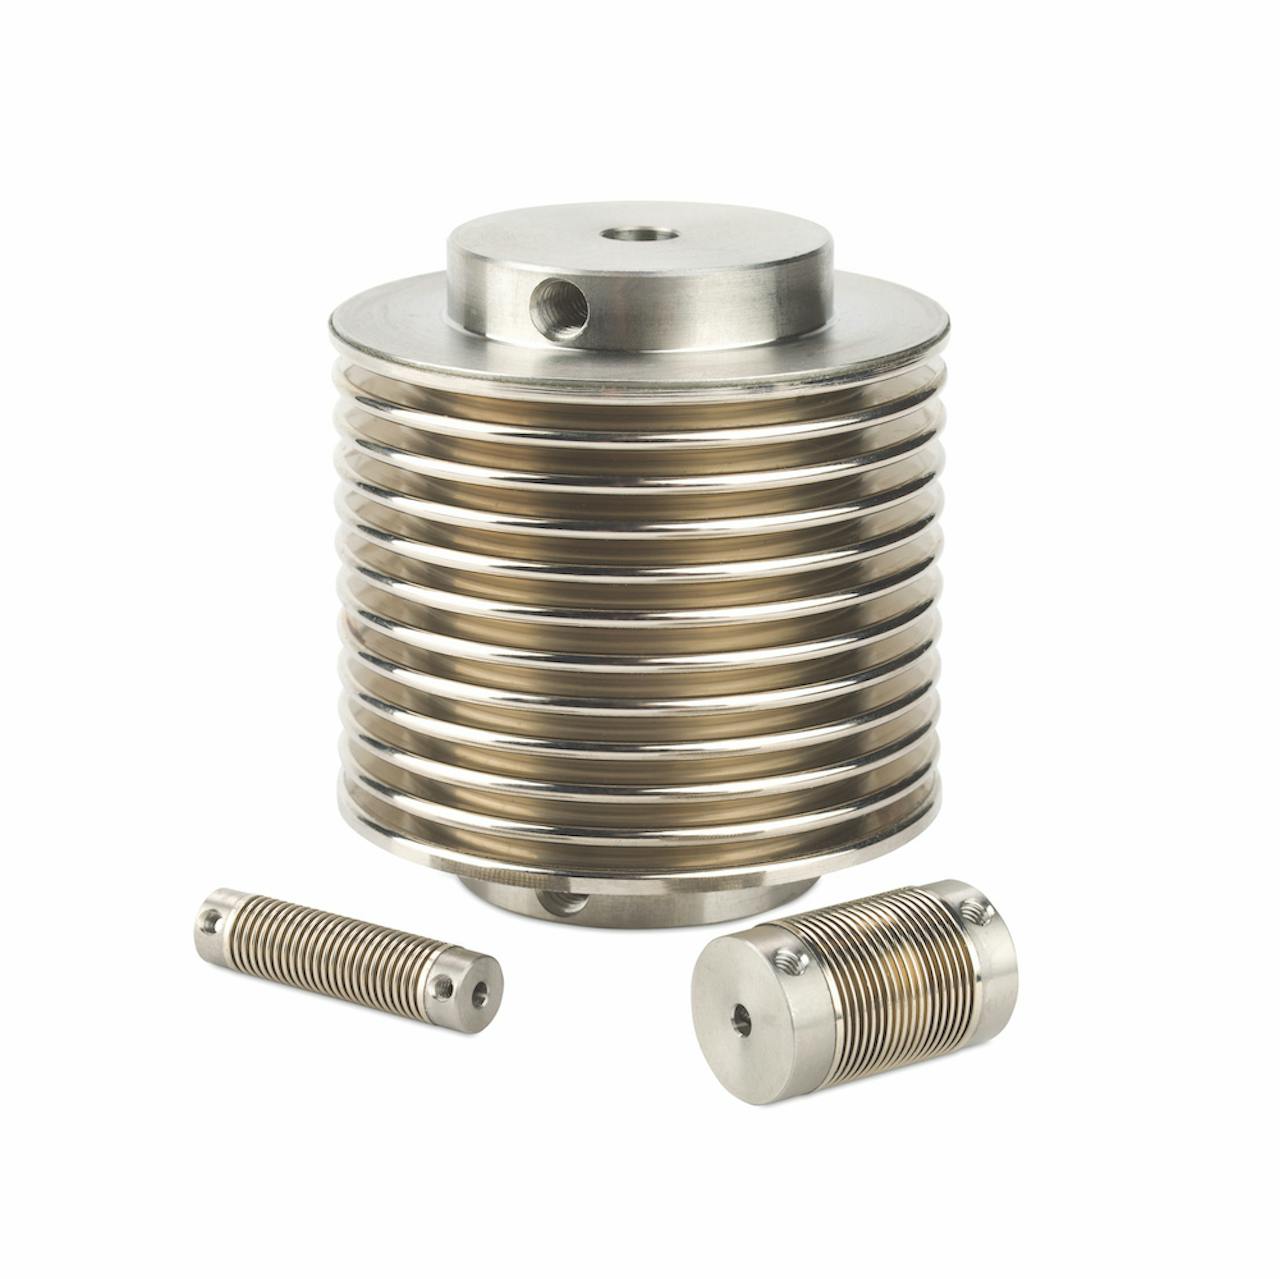 Bellows couplings and flexible shaft couplings